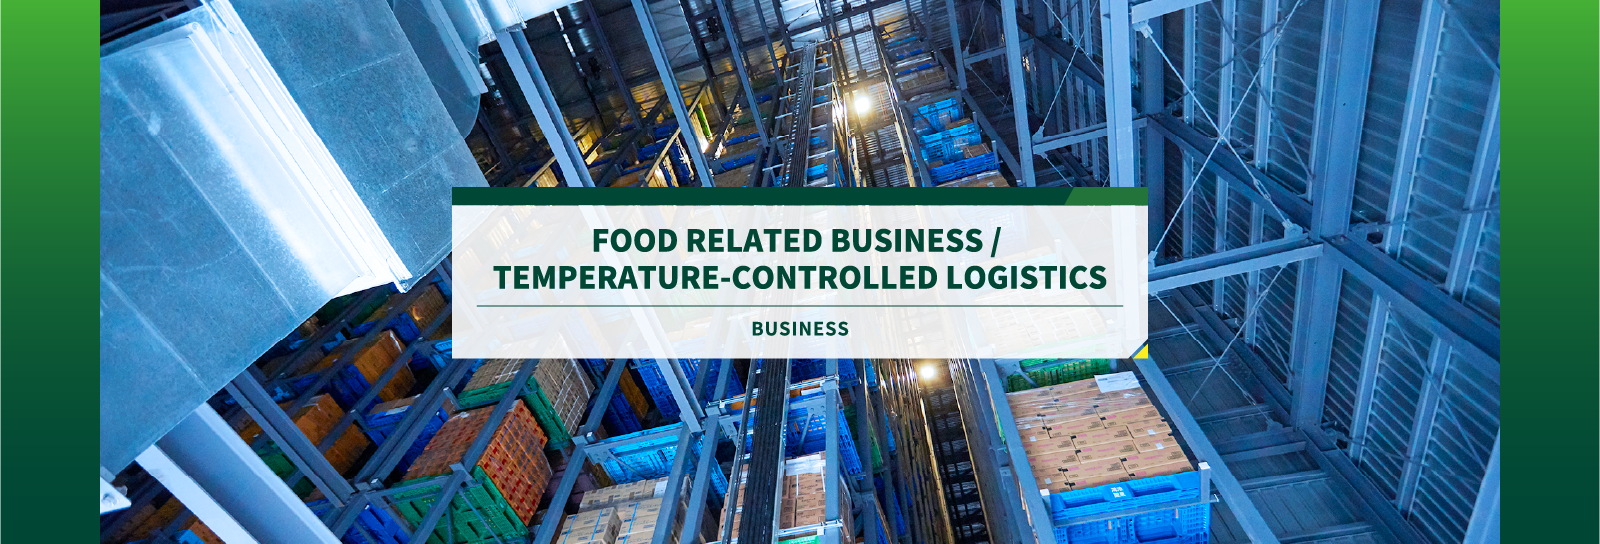 FOOD RELATED BUSINESS /  TEMPERATURE-CONTROLLED LOGISTICS BUSINESS